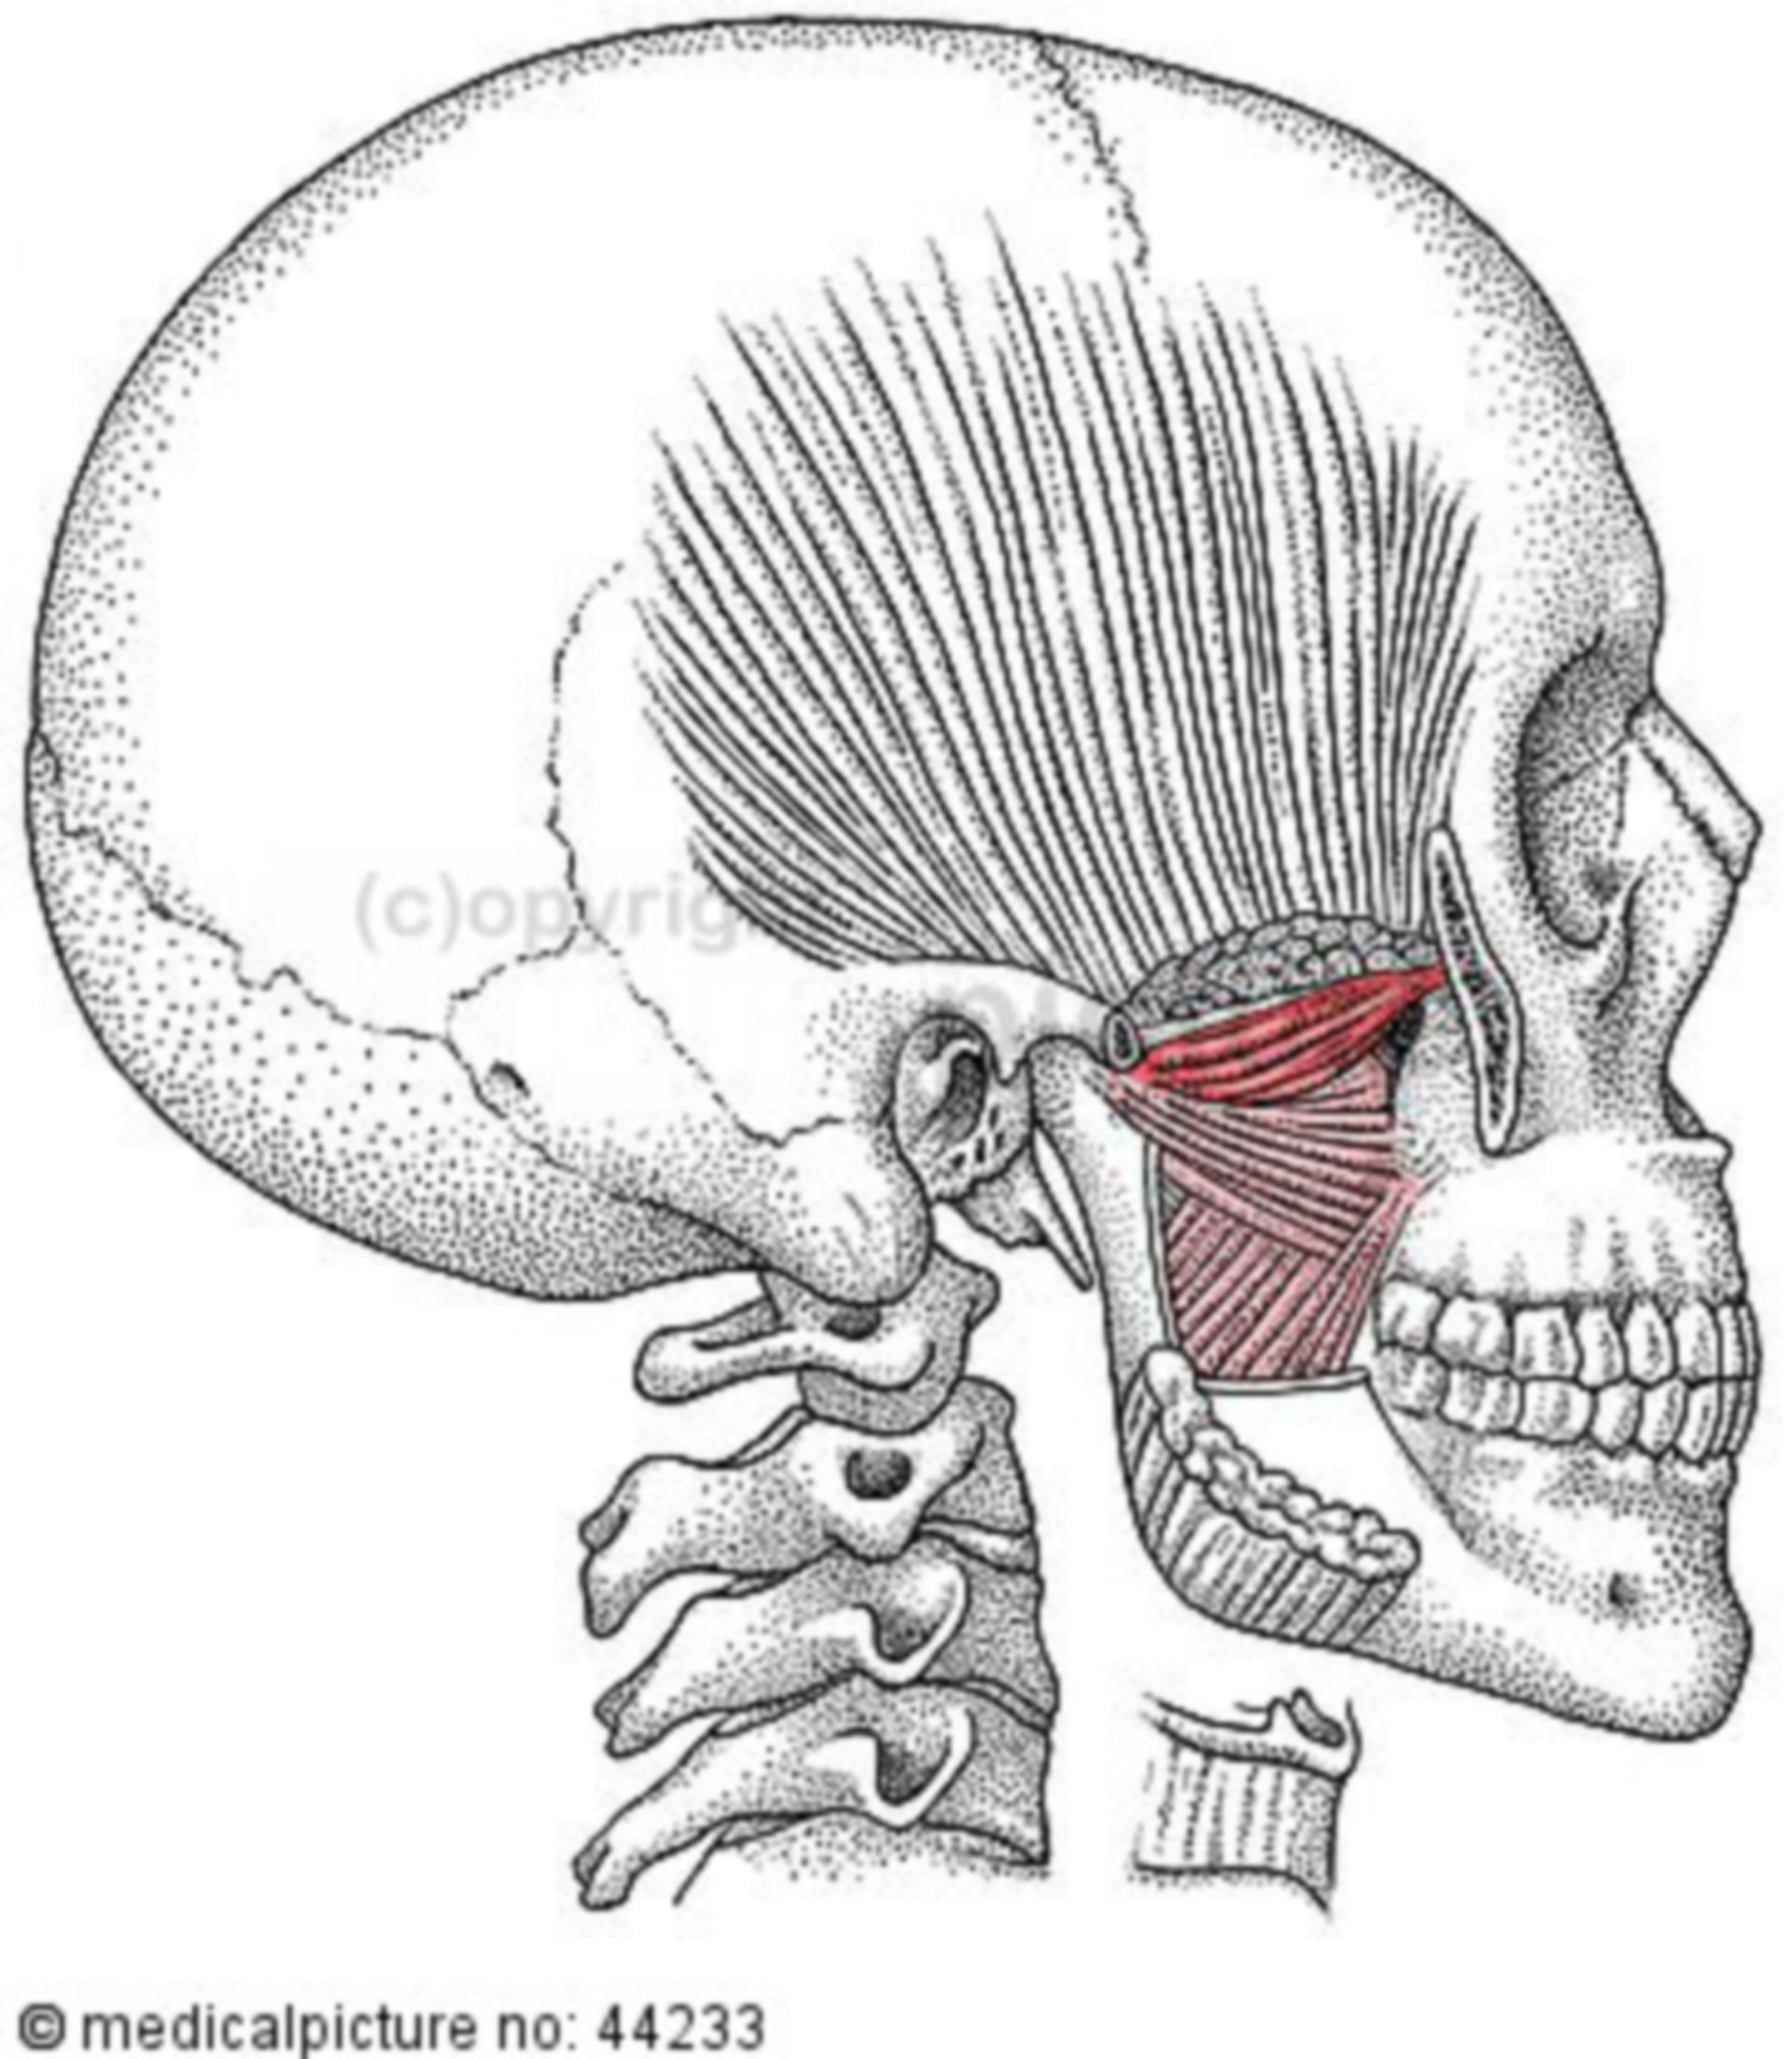 Cranium with lateral pterygoid muscle